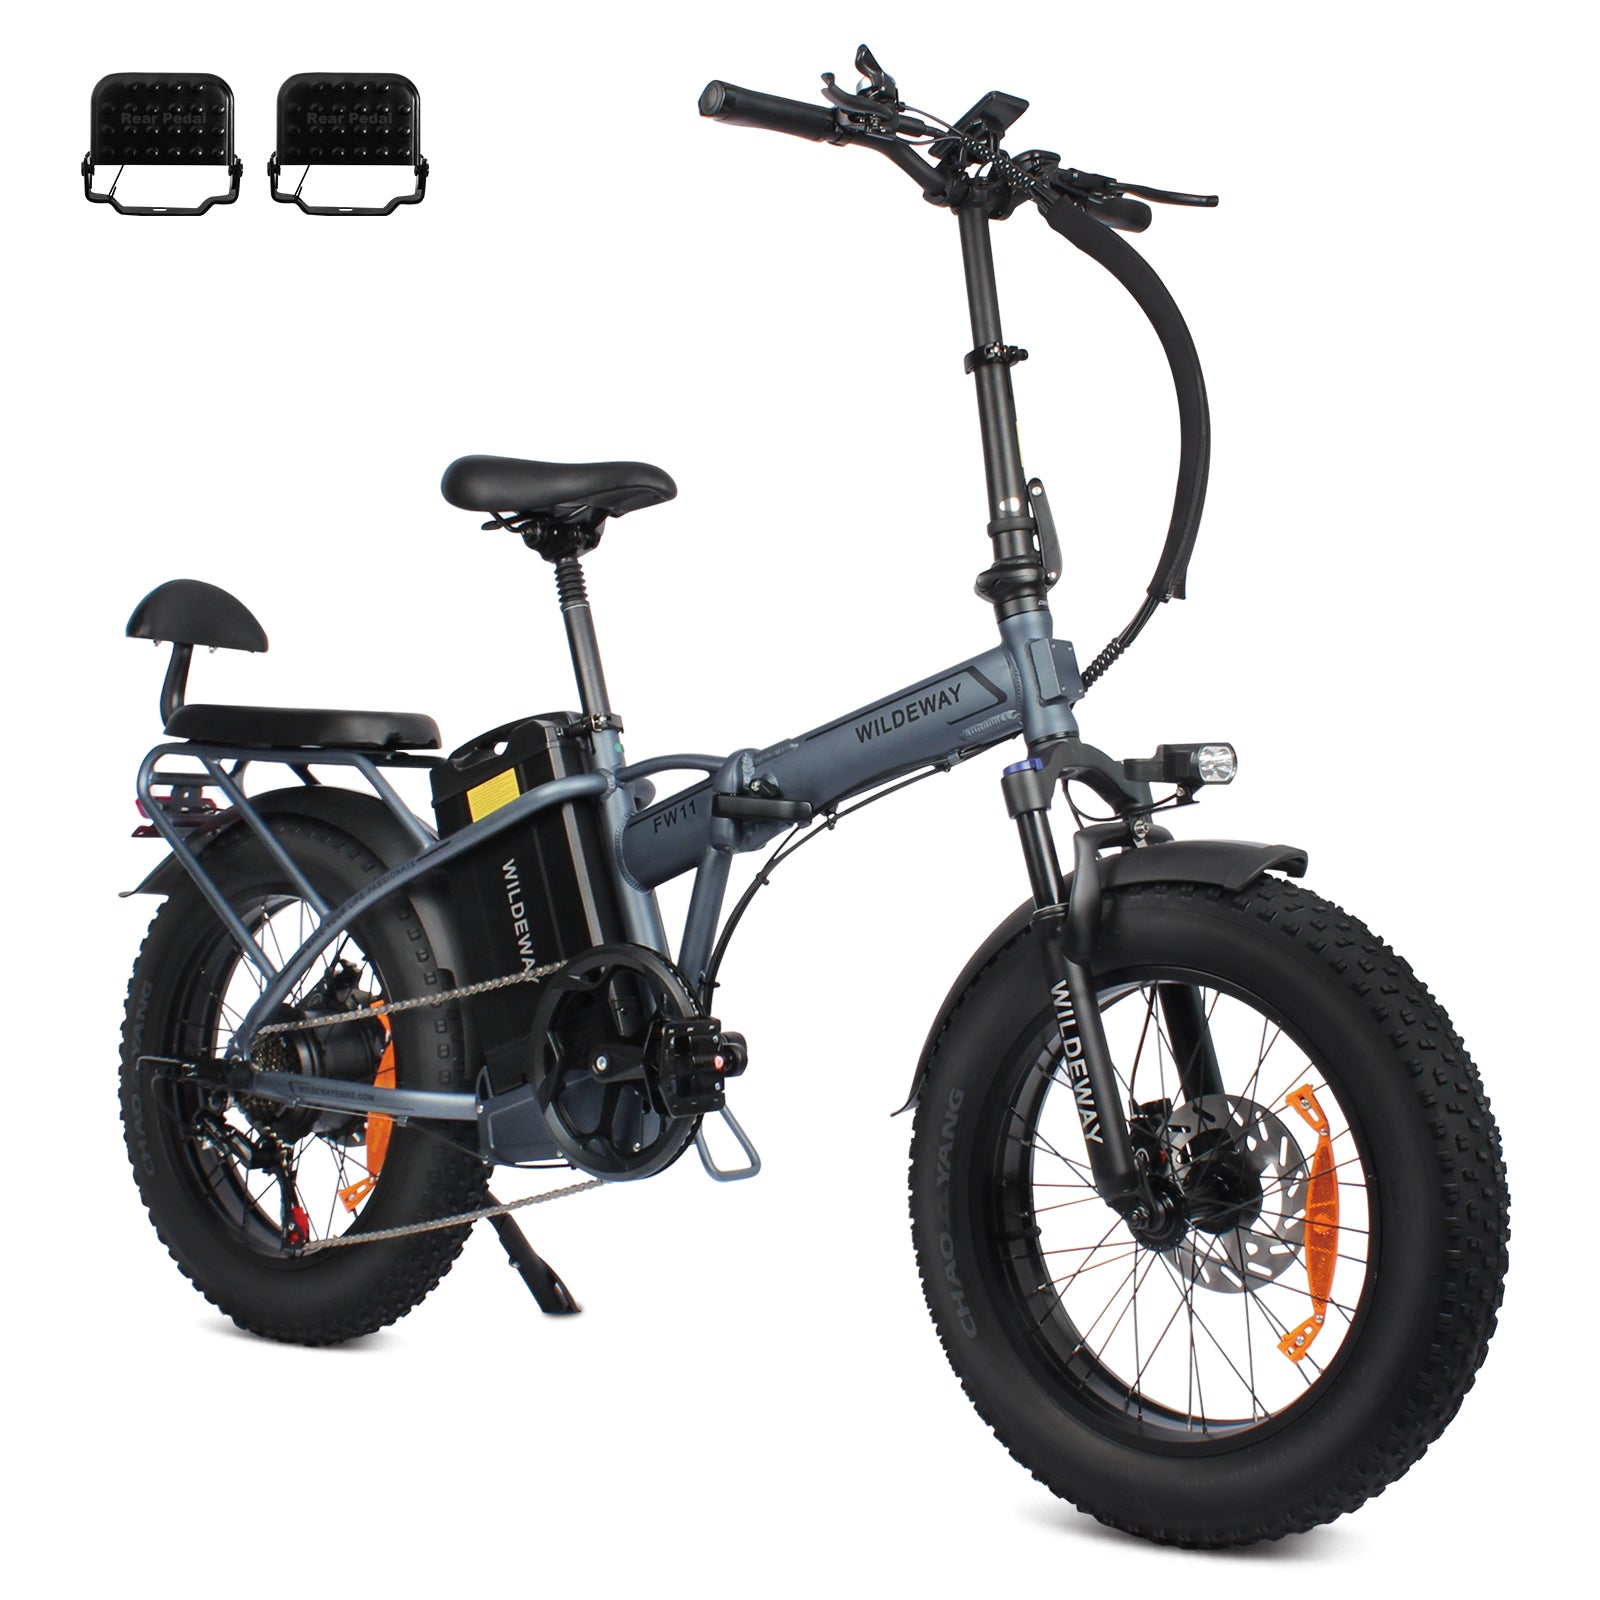 Wildeway FW11 4.0 adult Electric Bicycle